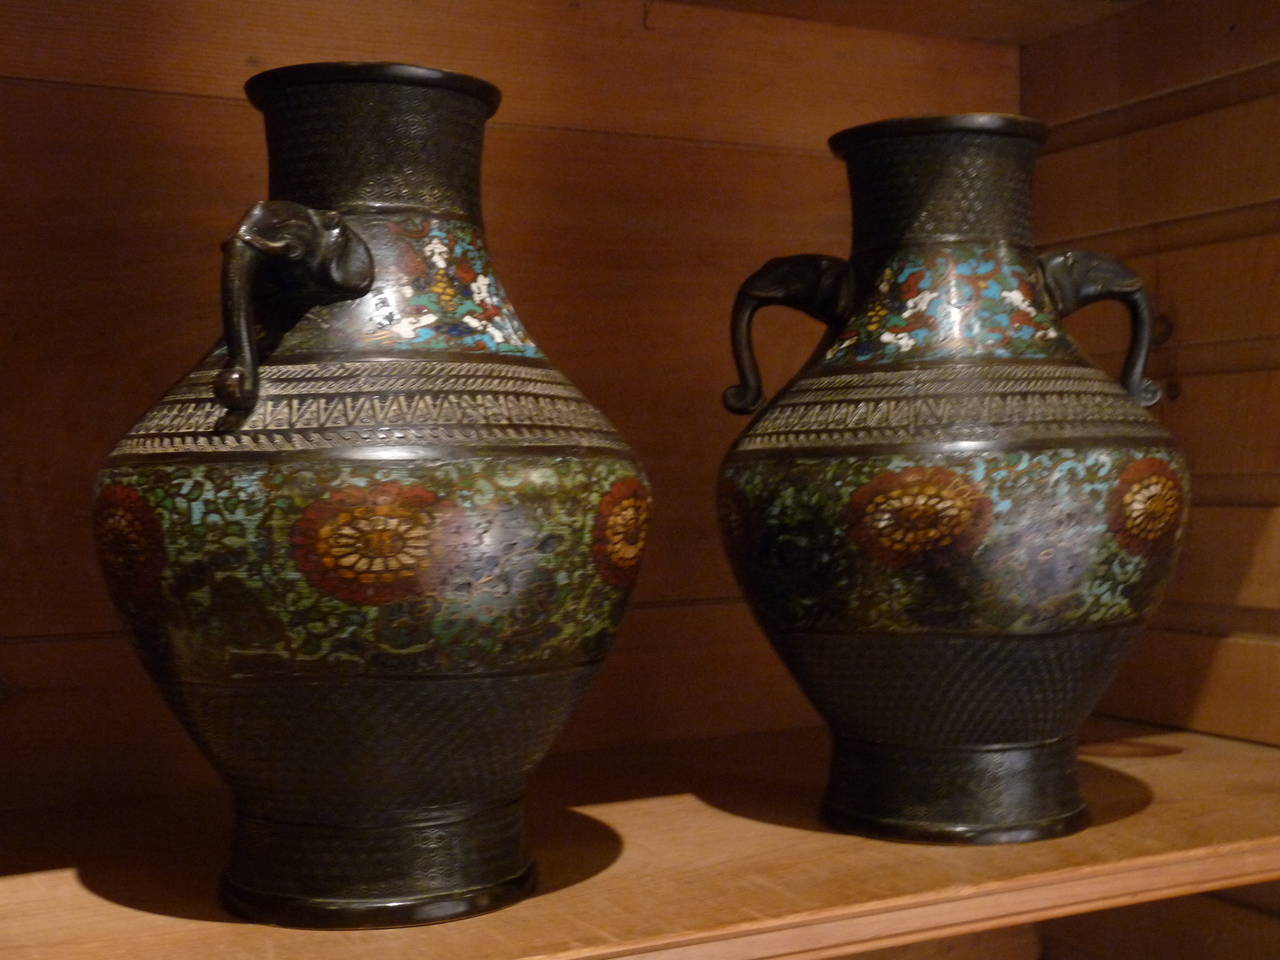 A beautiful pair of Cloisonné bronze vases with stylized elephant head handles. 
The enamel has wonderful detail and color making the vases a striking pair.